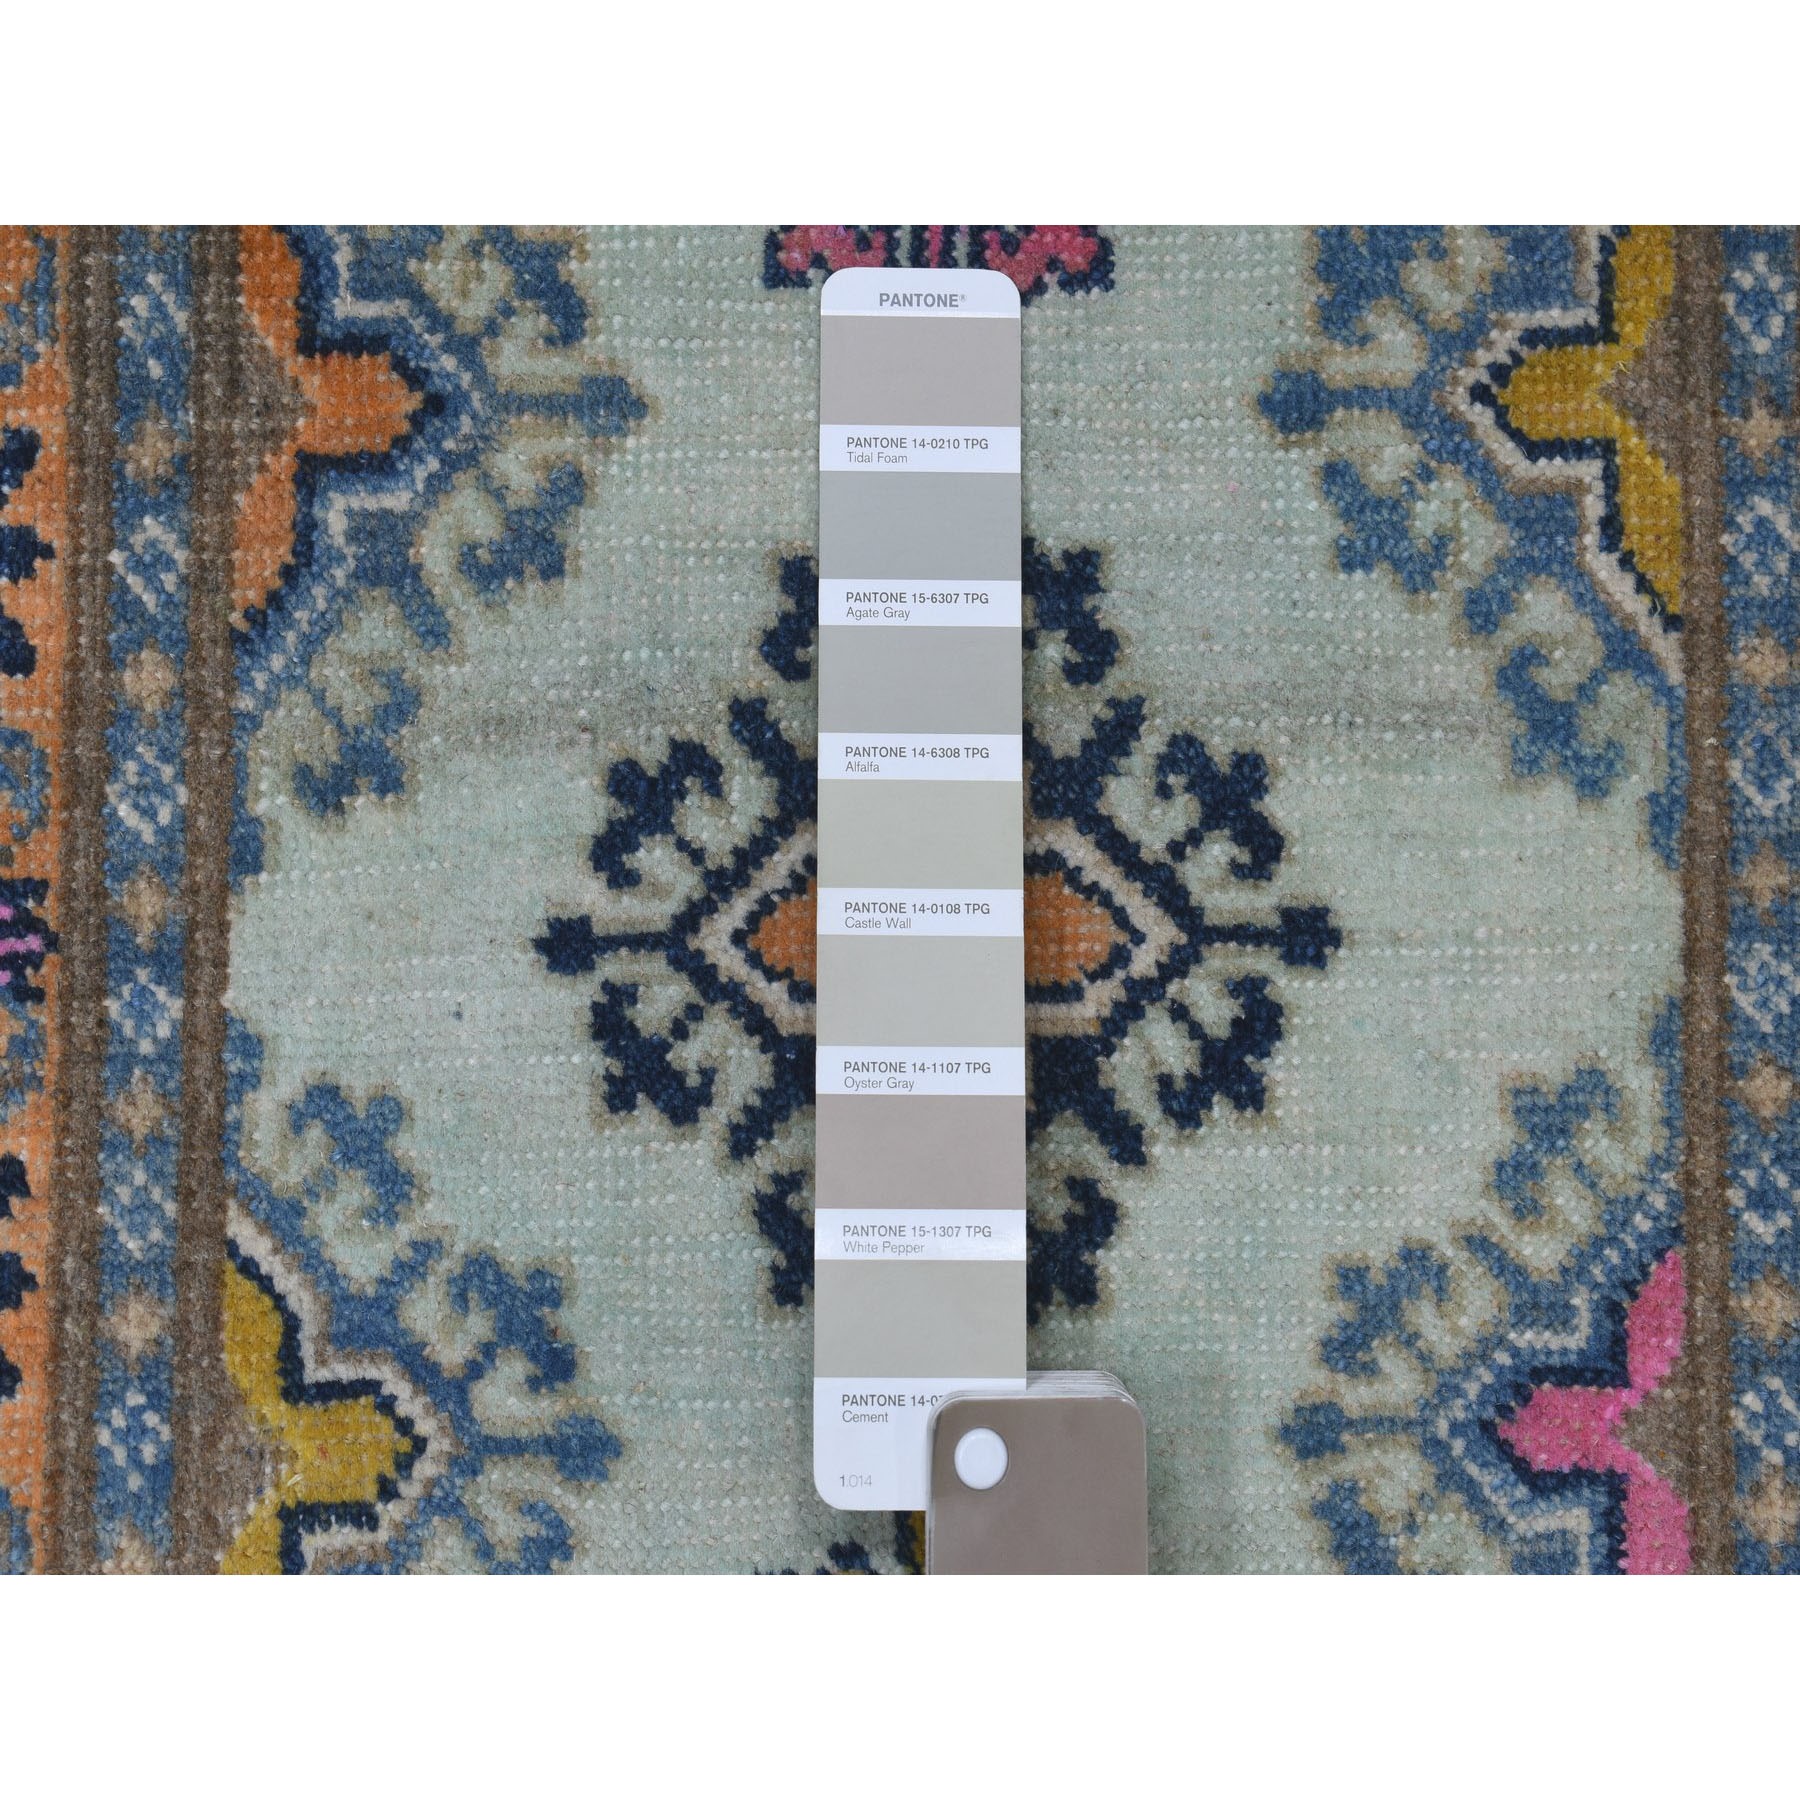 2-x3-1  Colorful Ivory Fusion Kazak Pure Wool Geometric Design Hand Knotted Oriental Rug 